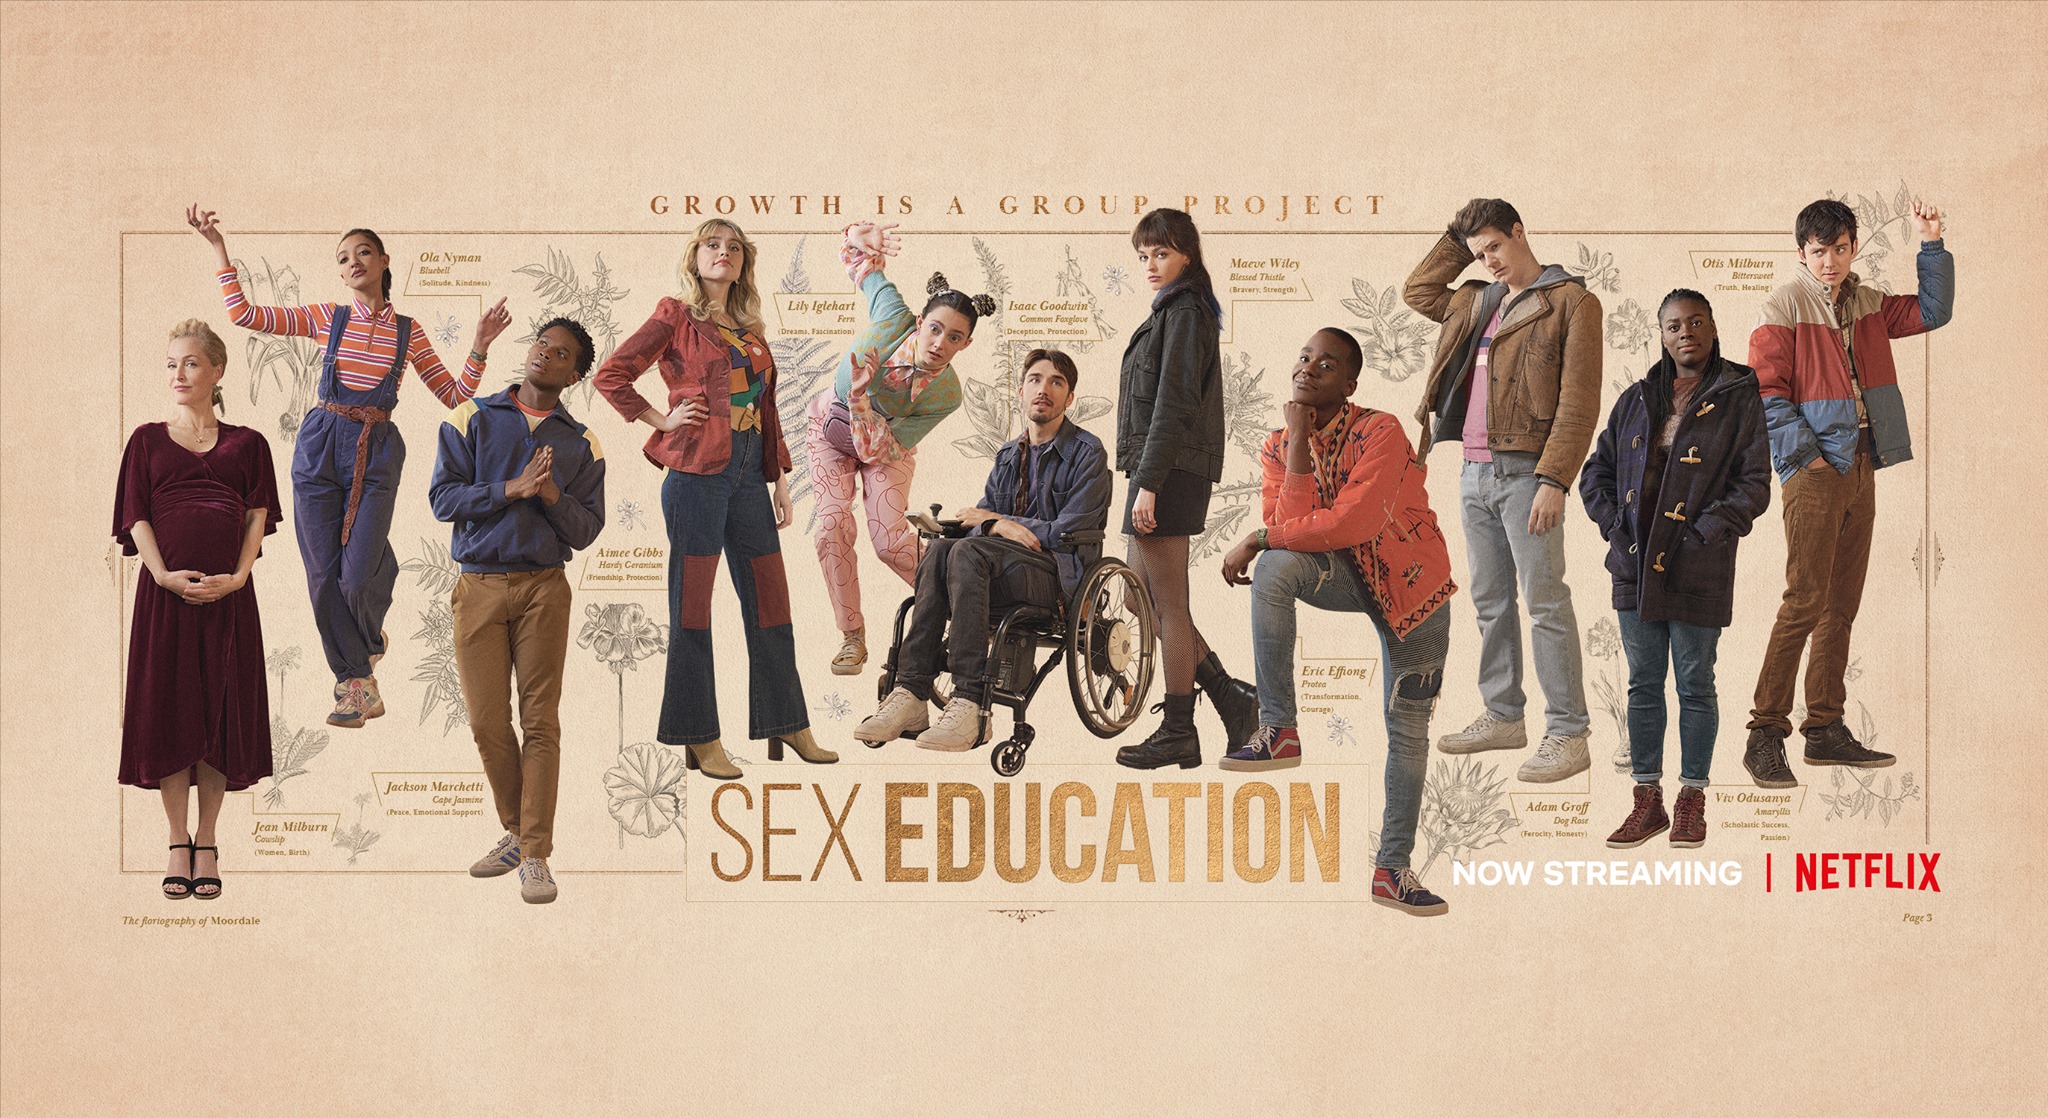 TV Show Sex Education HD Wallpaper | Background Image